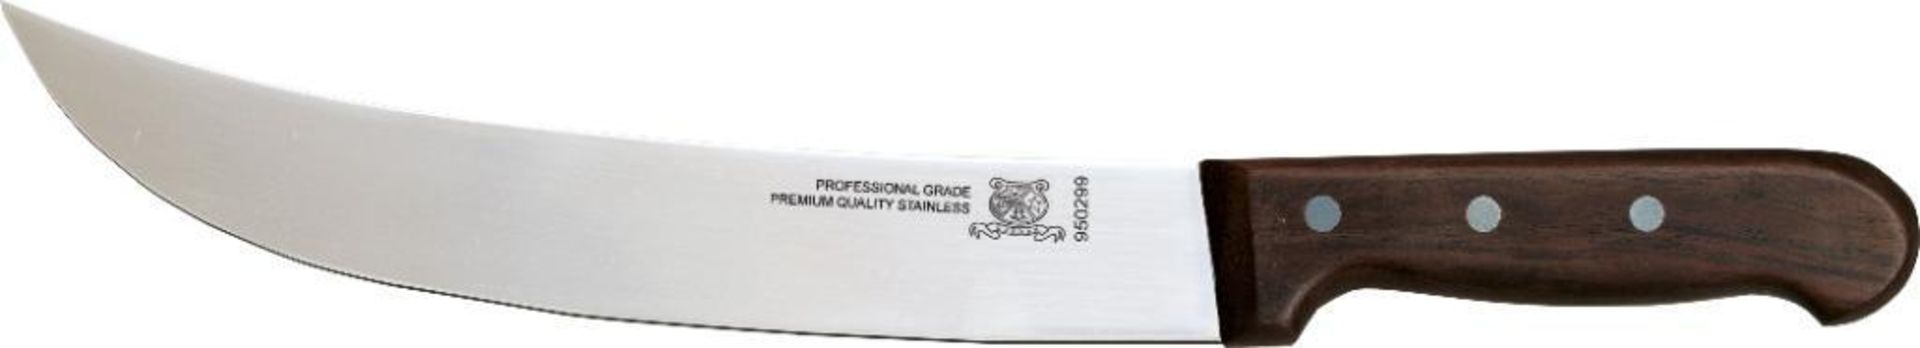 OMCAN 12" STEAK CUTTING KNIFE WITH ROSE WOOD HANDLE - GERBAN BLADE - NEW - Image 2 of 2